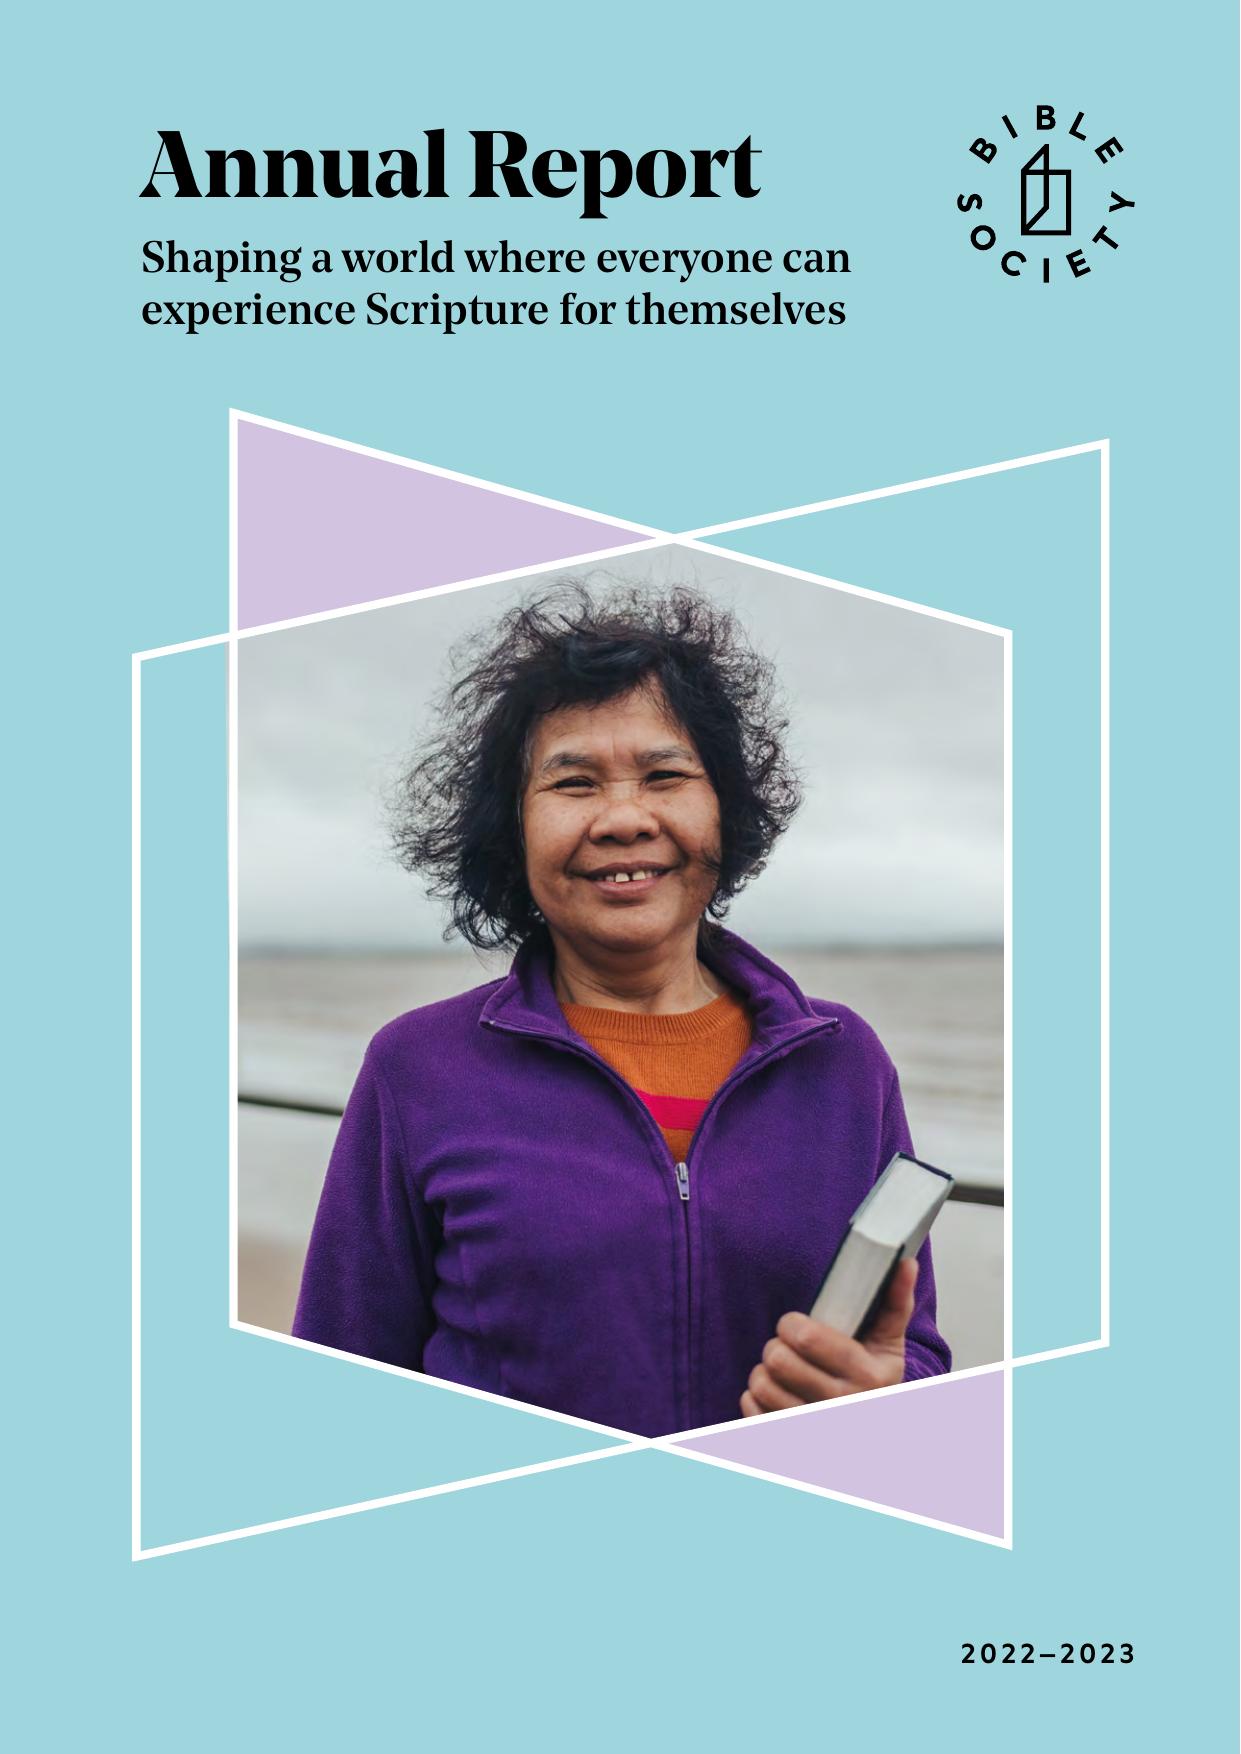 BIBLESOCIETY.ORG.UK 2022 Annual Report